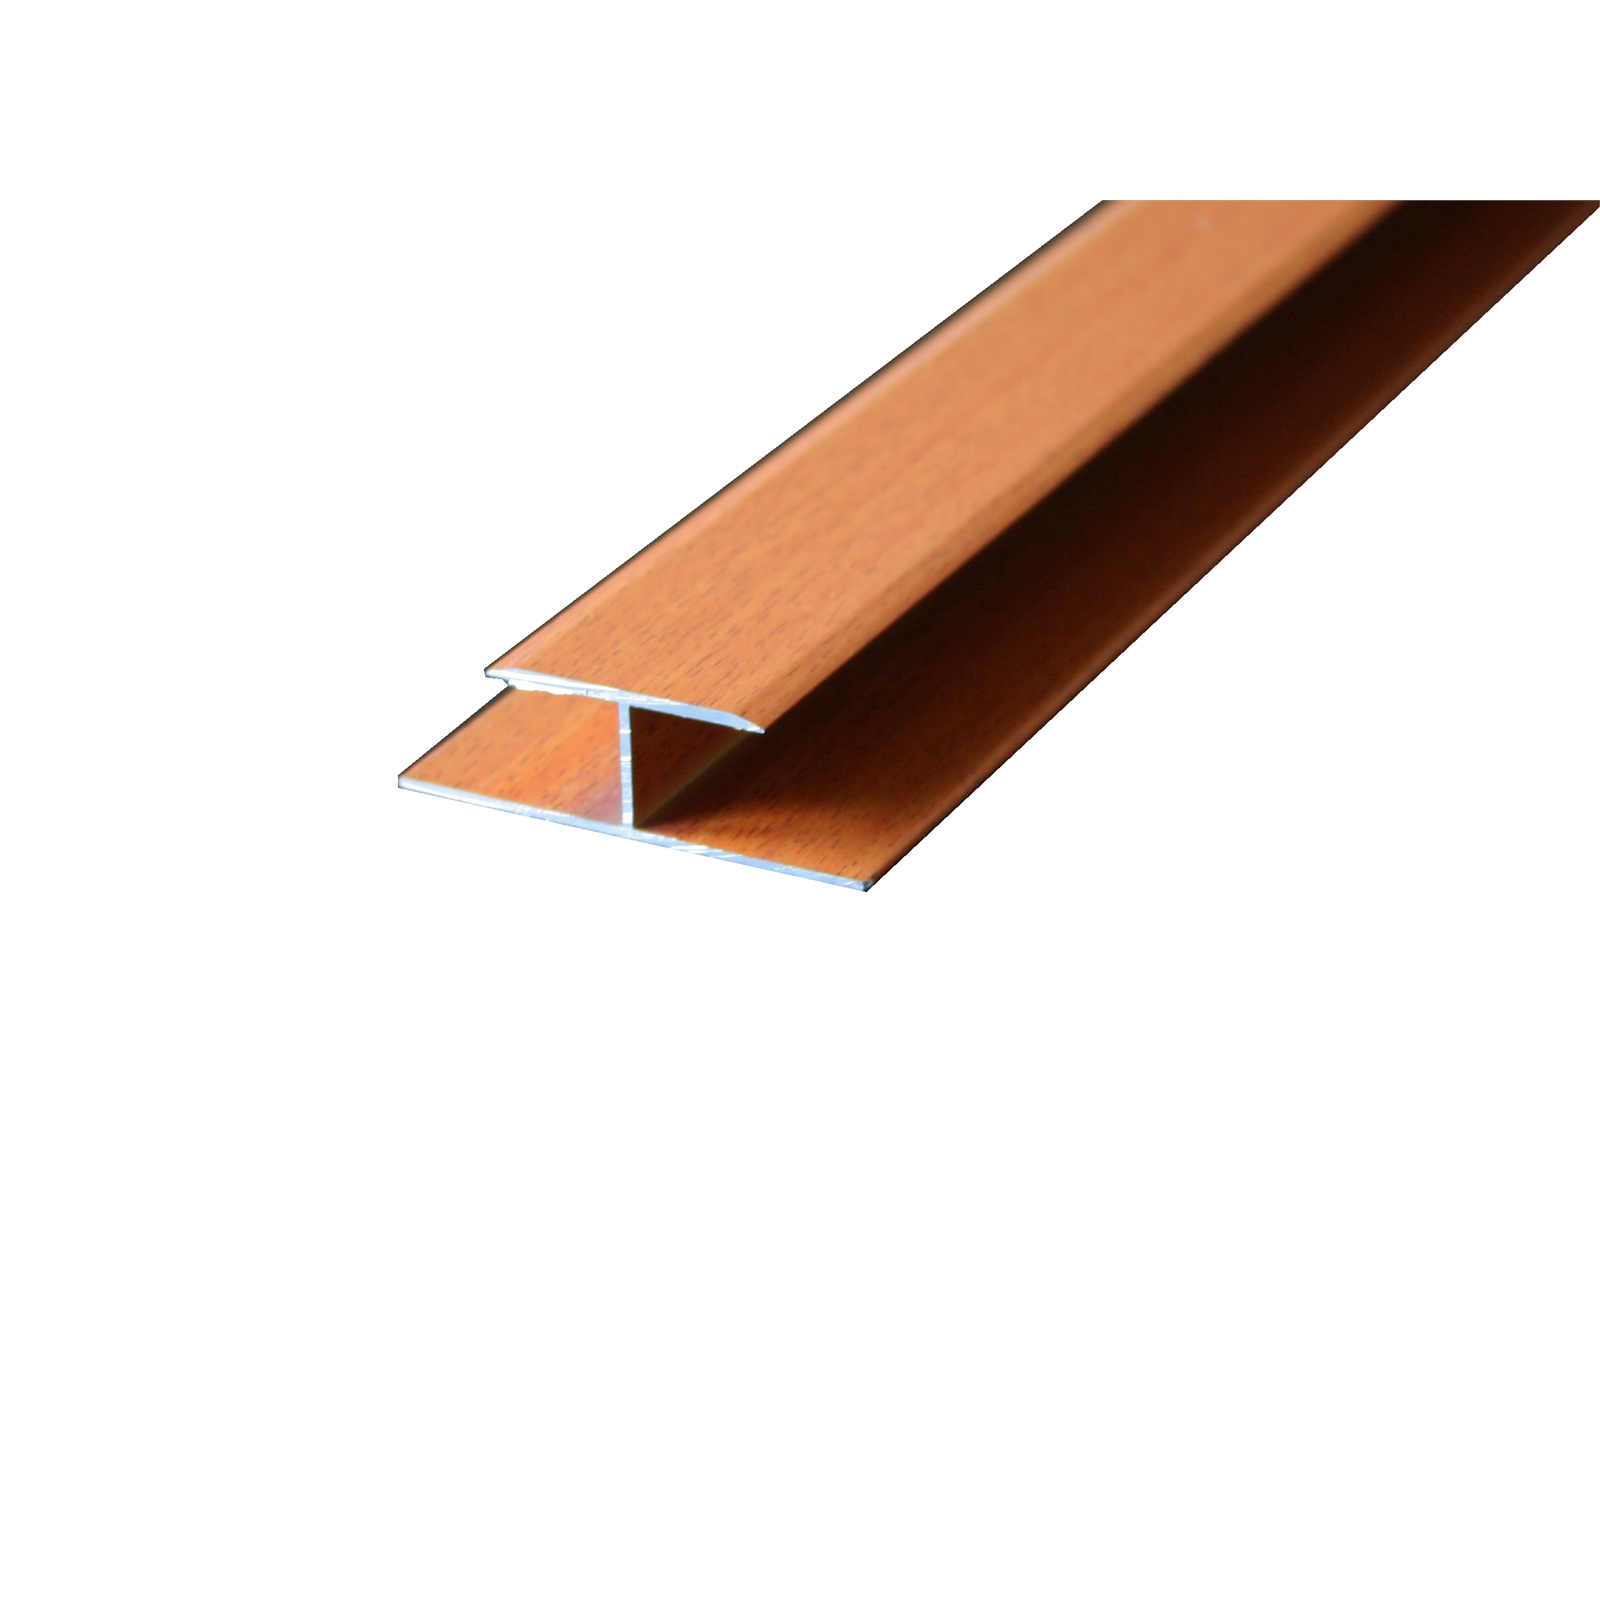 Roberts 1.65m x 15mm Light Expansion Joint Timbertone Floating Floor Trim